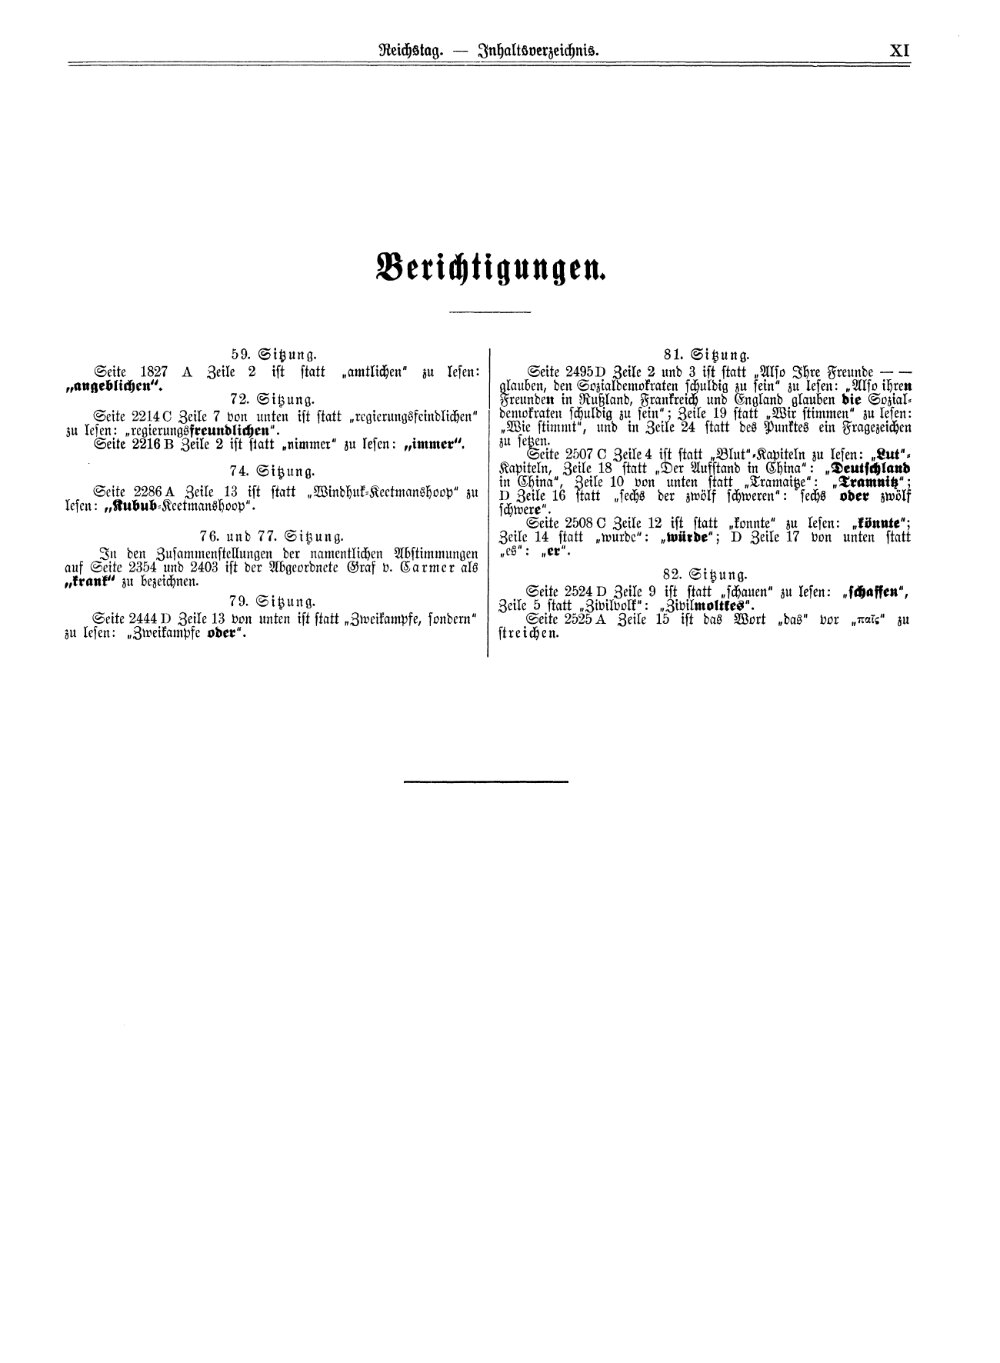 Scan of page XI